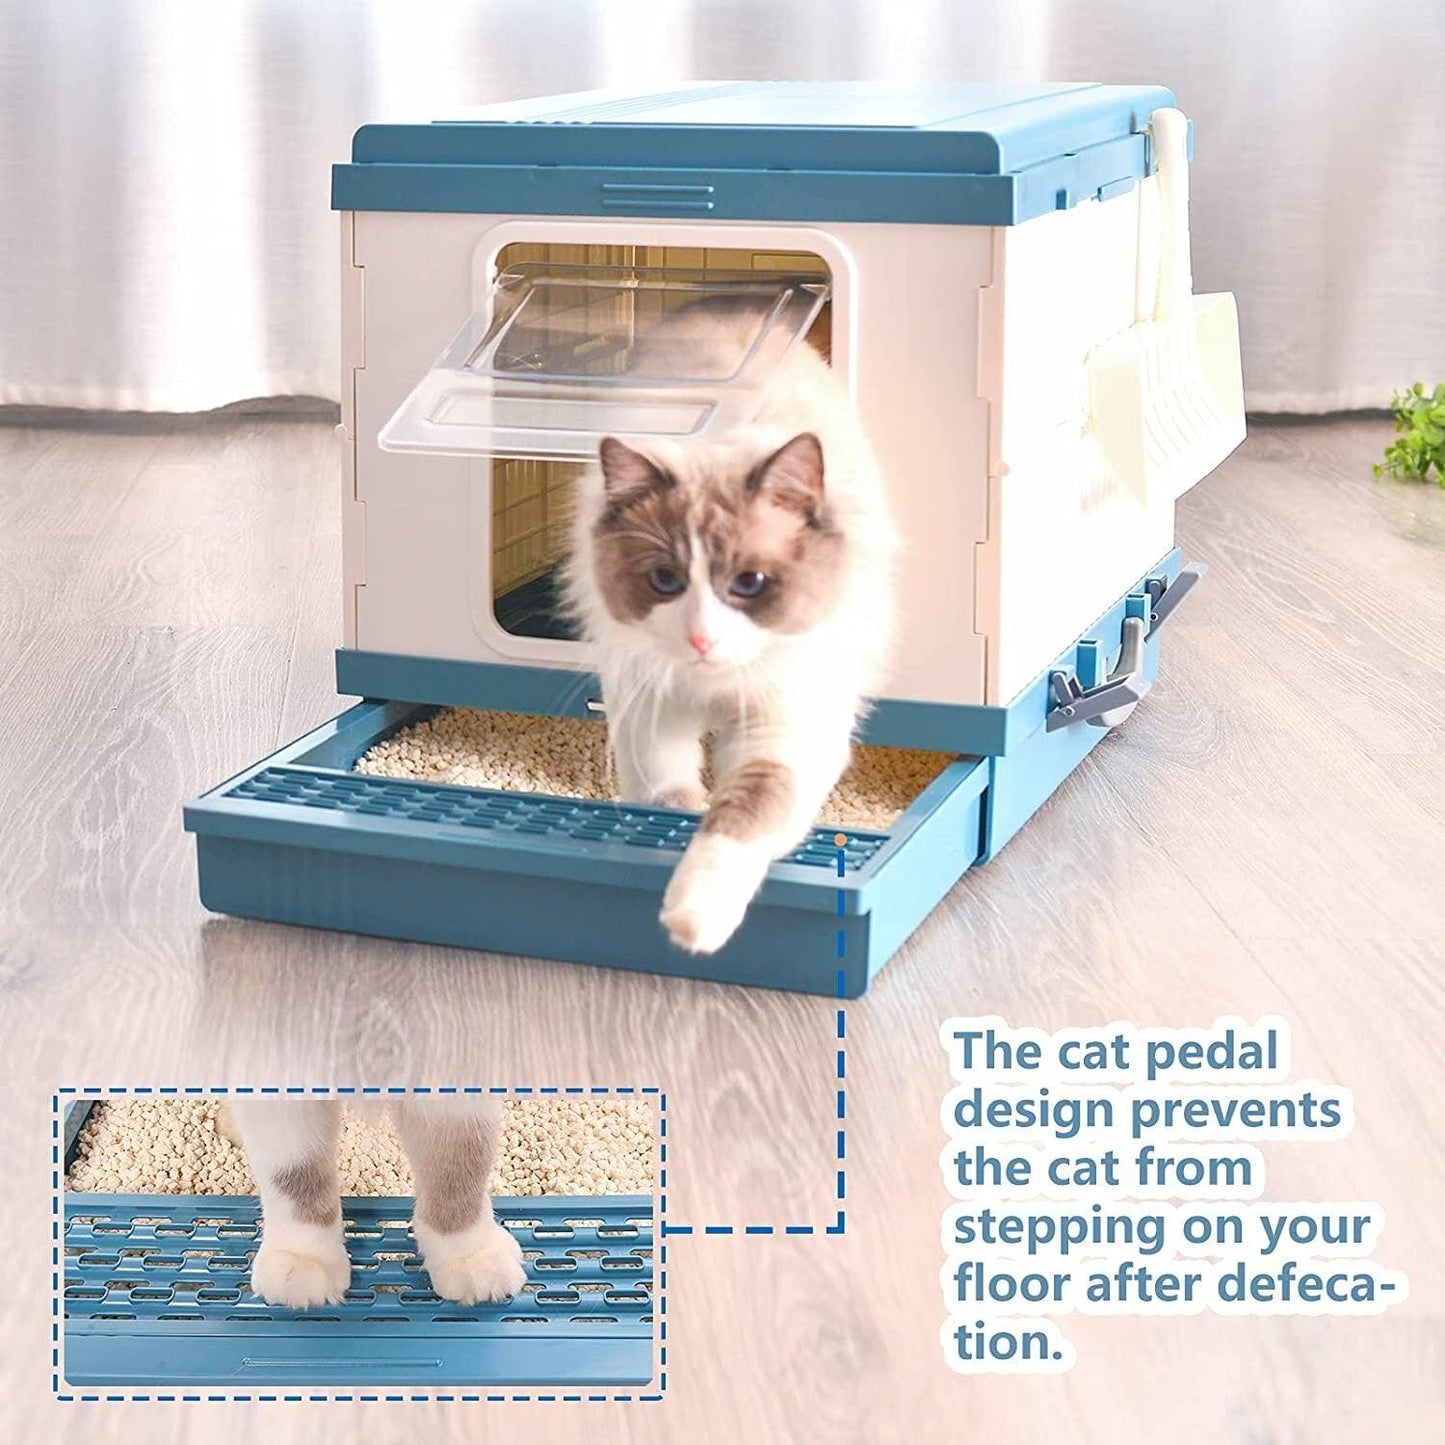 XL Portable Cat Toilet Litter Box Tray Foldable House with Handle and Scoop Blue